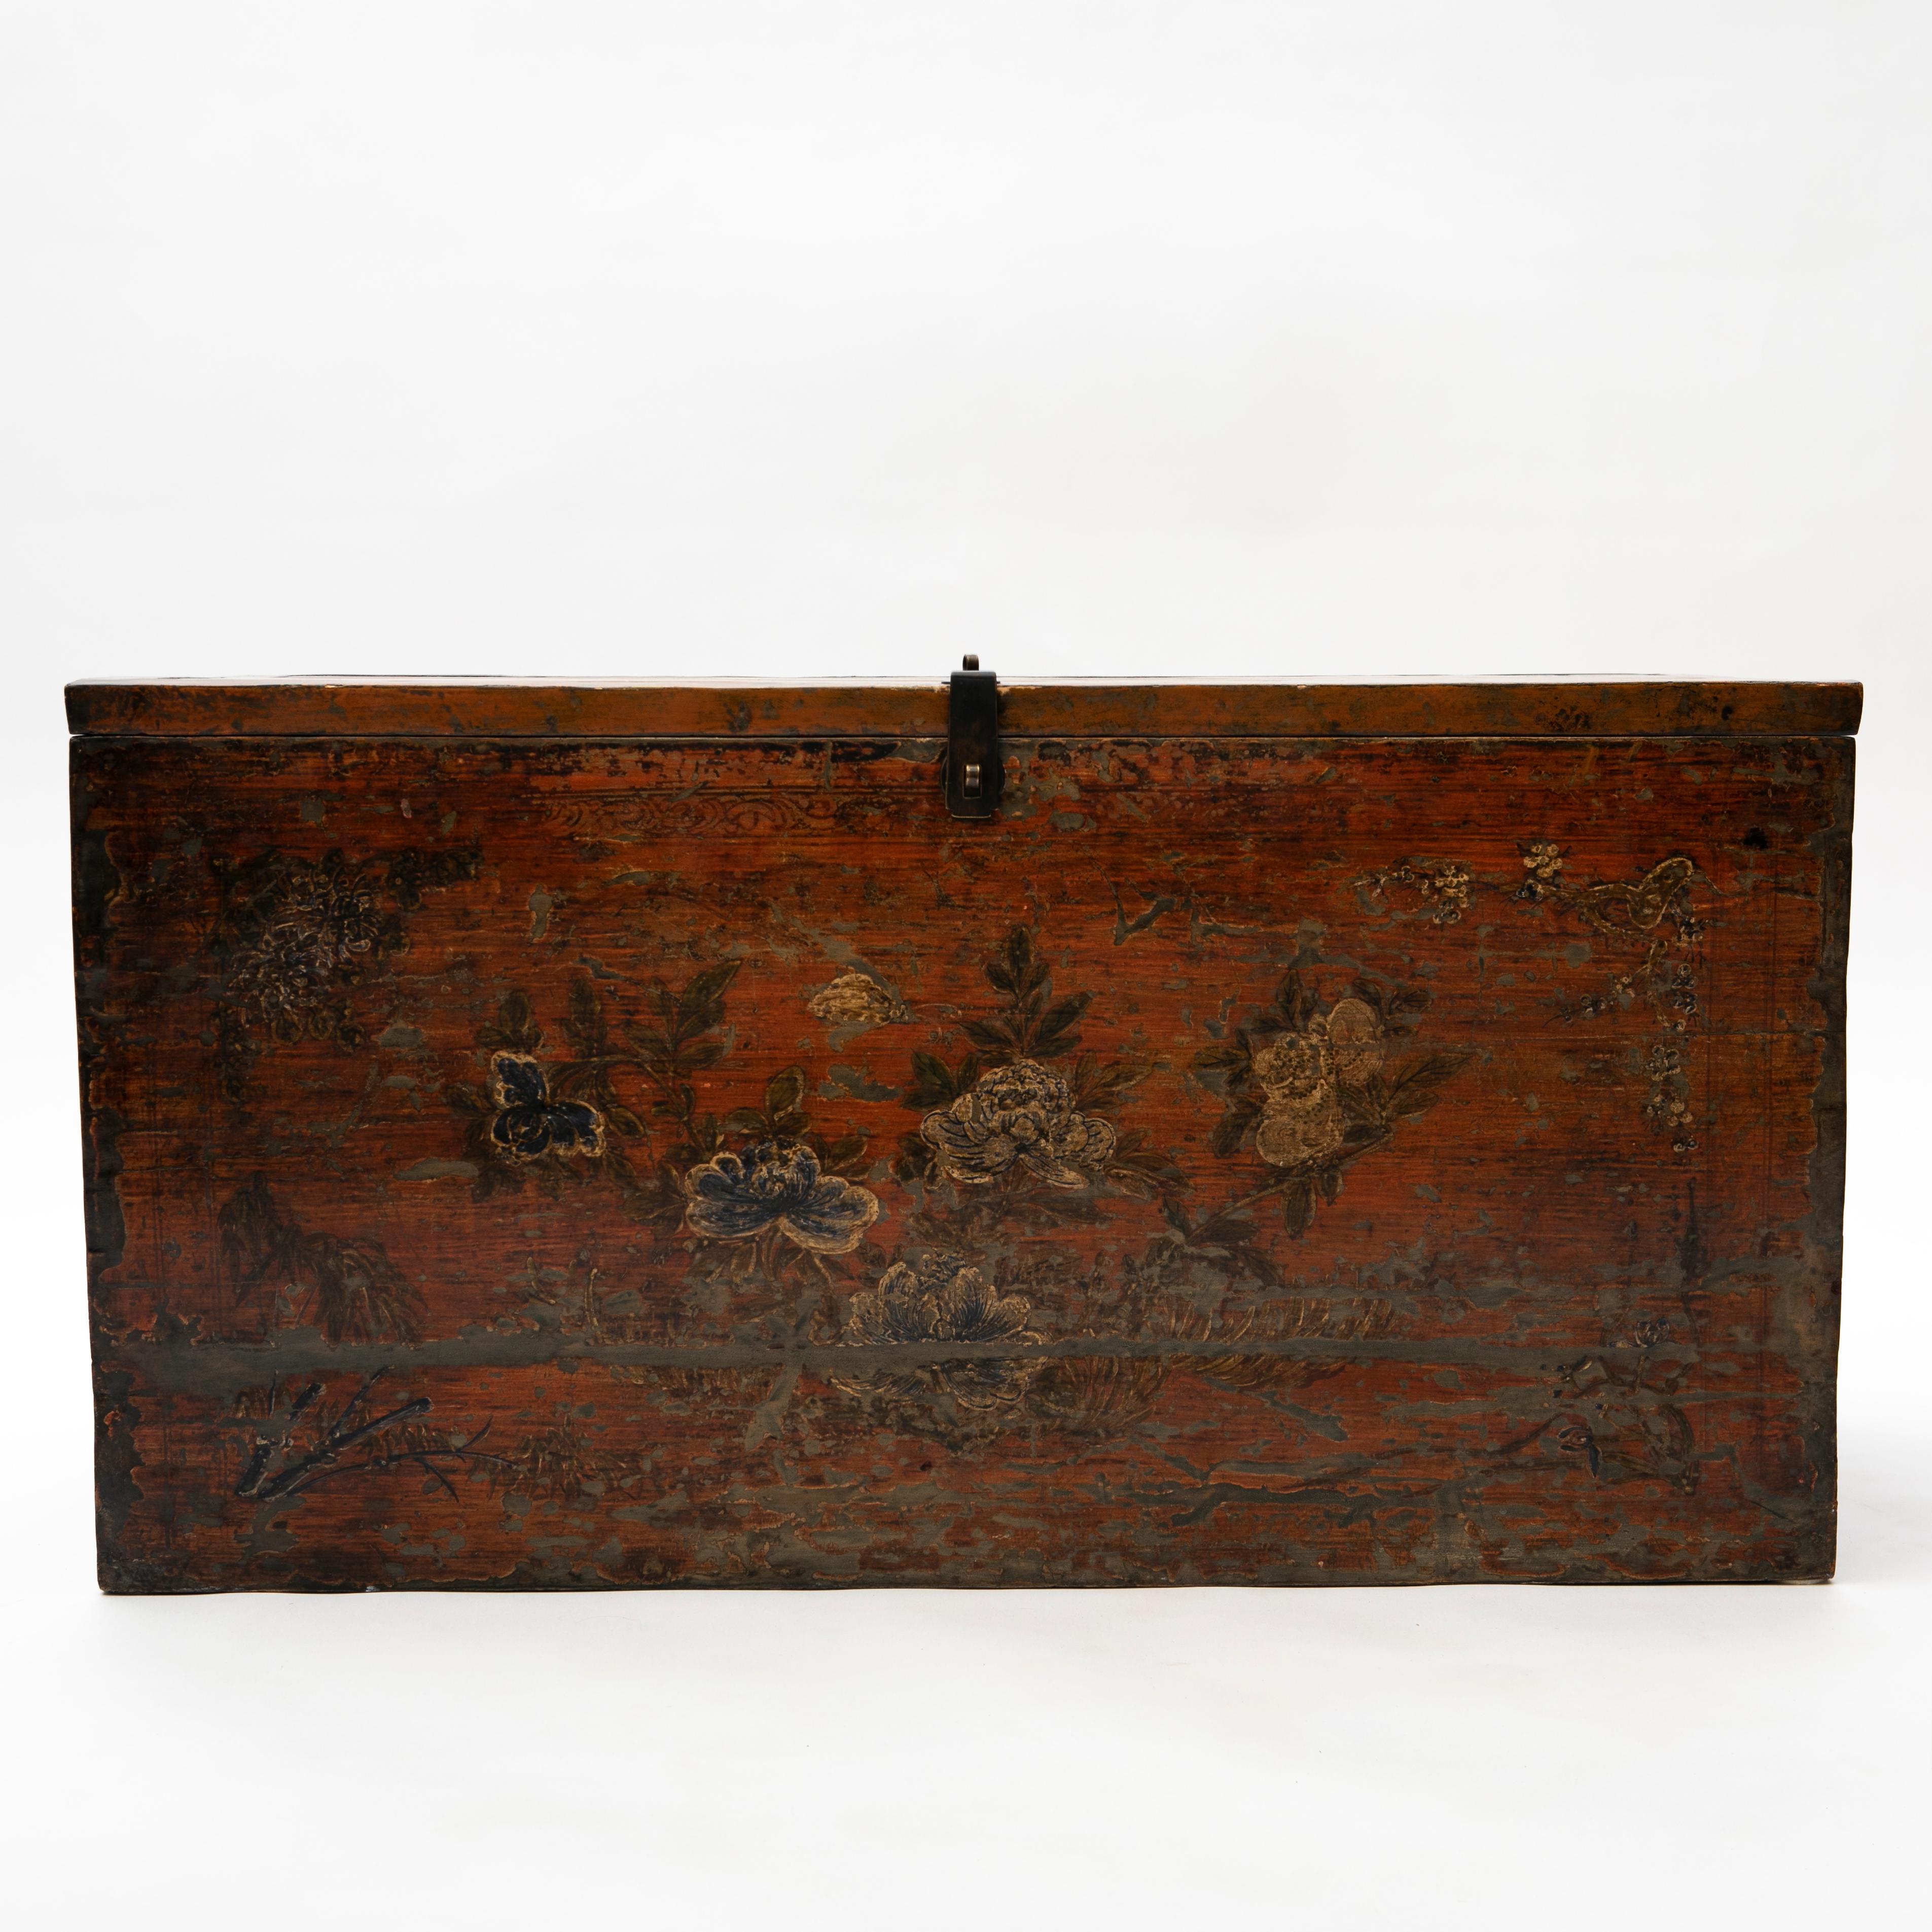 Wood Chinese Antique Qing Dynasty Period Original Decorated Trunk